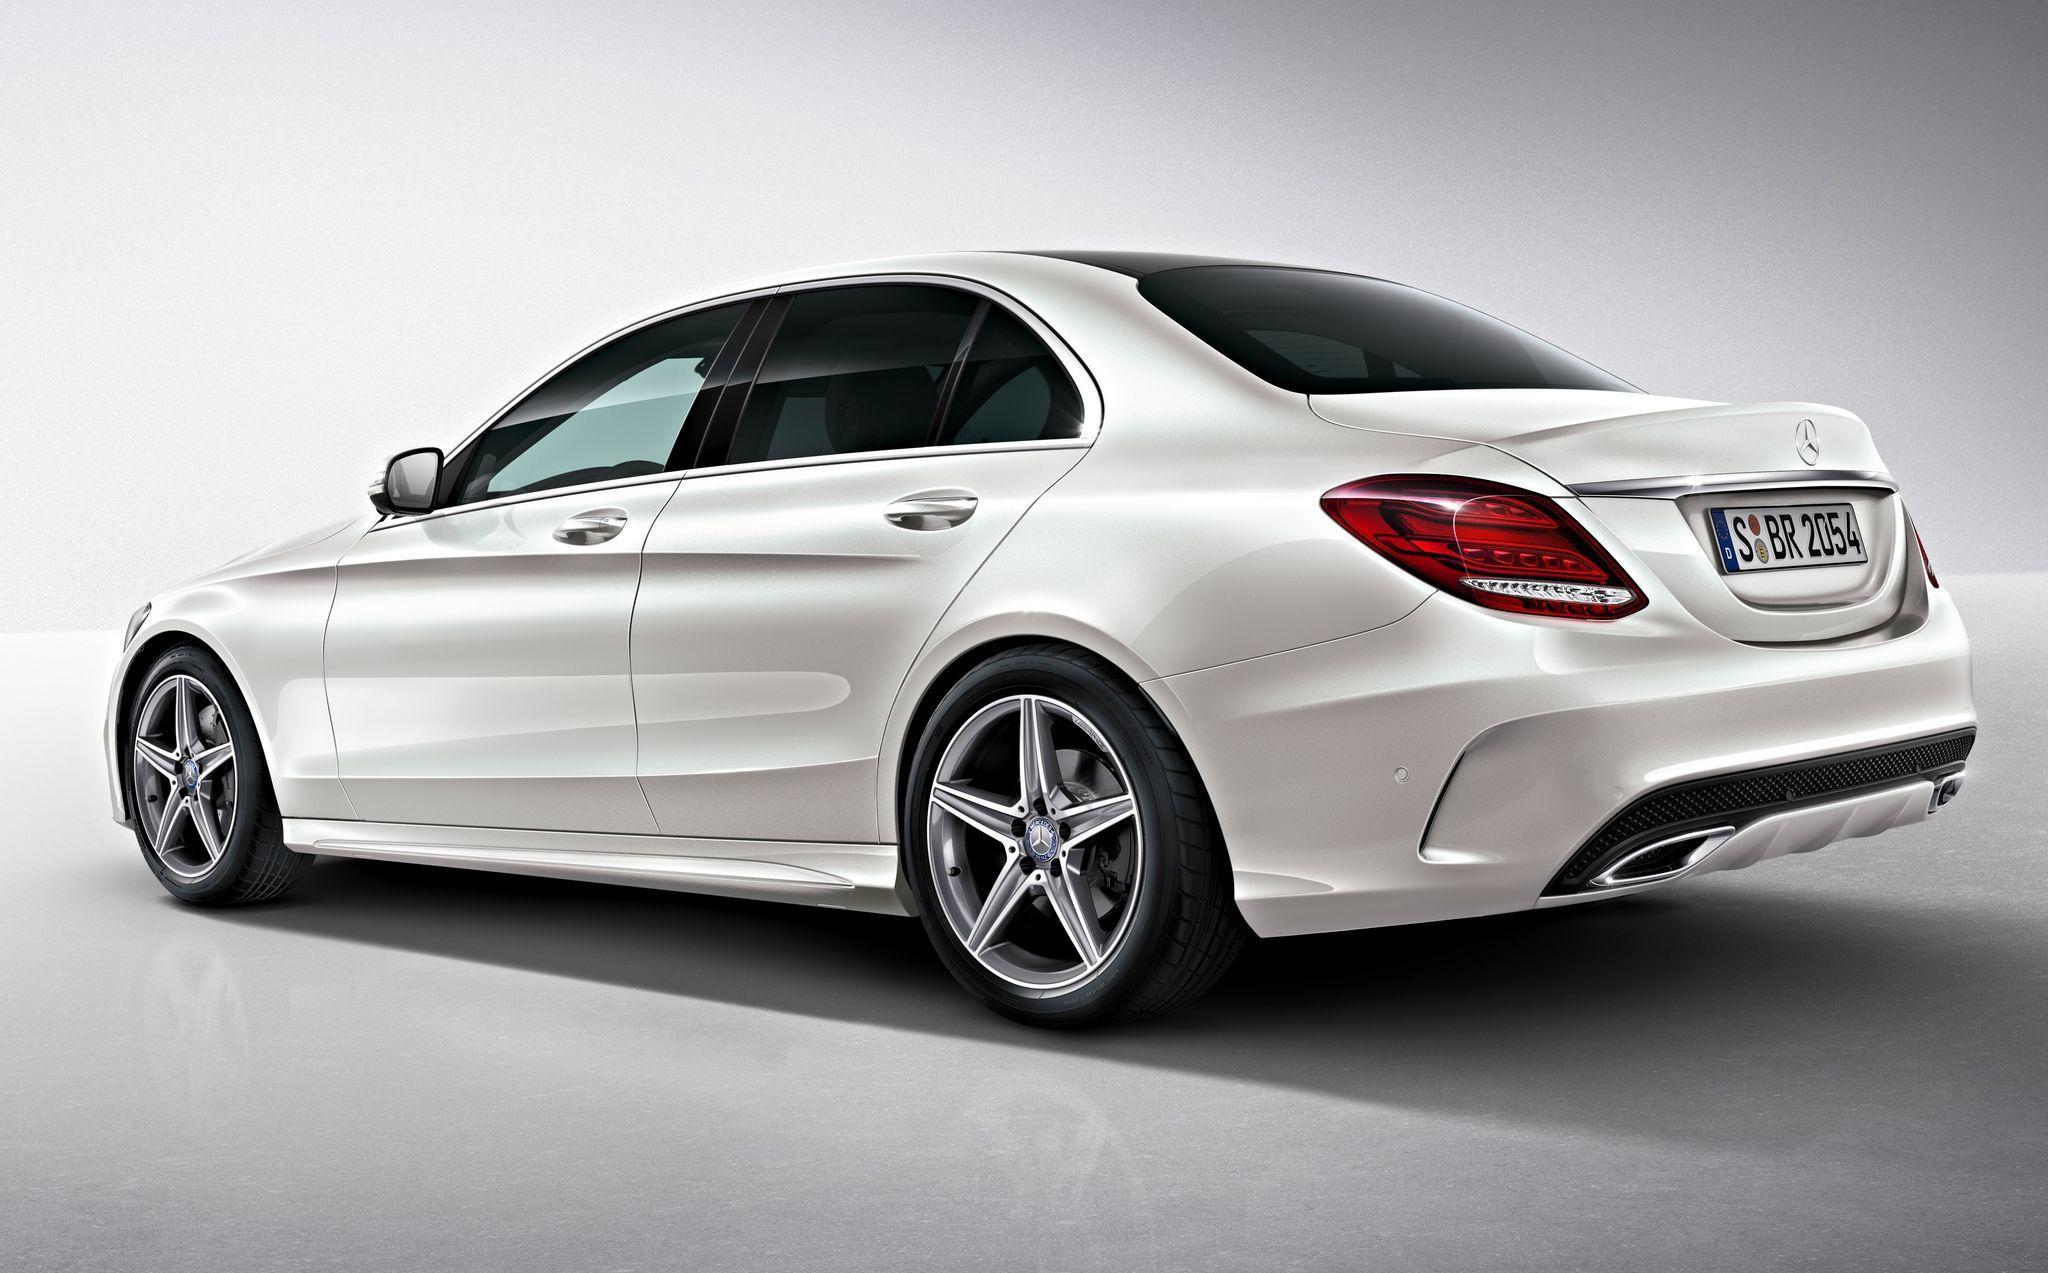 Design Of The Car Mercedes C Class 2014 Wallpaper And Image